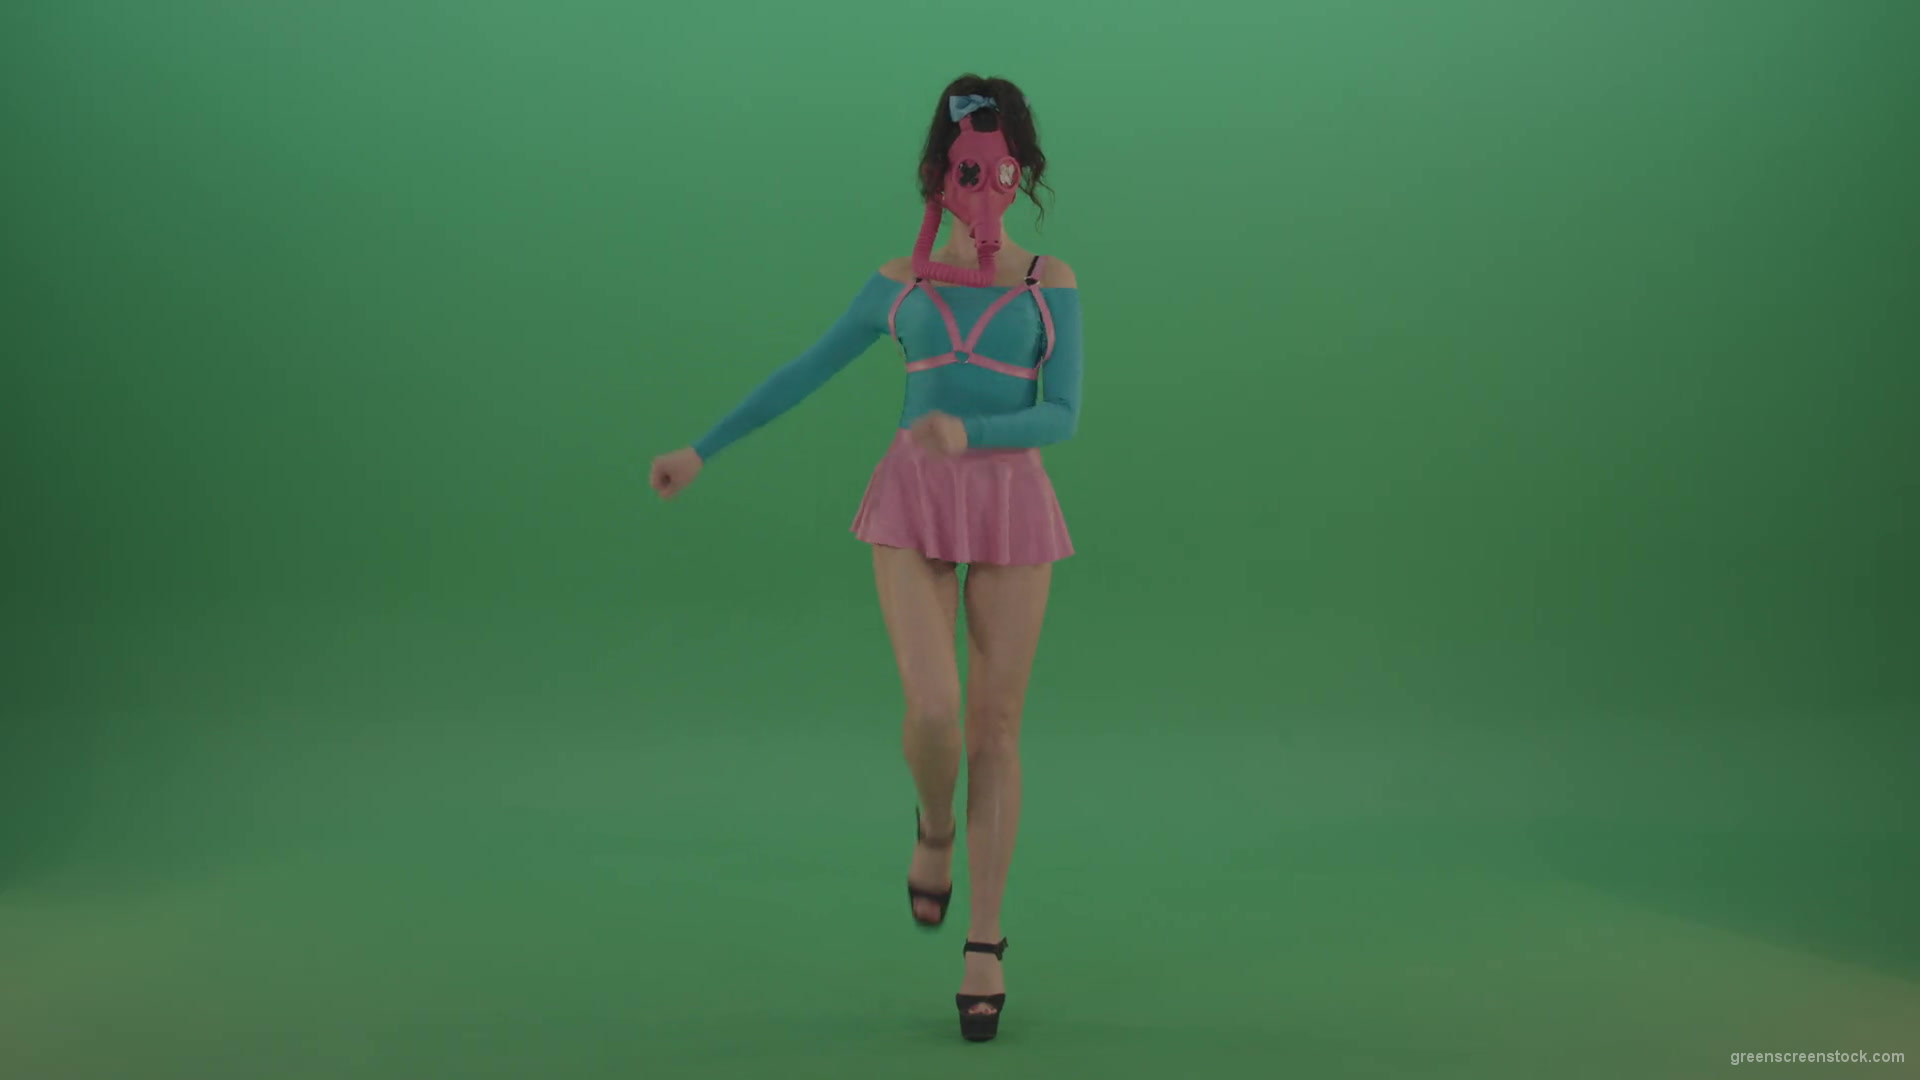 Sexy-Girl-in-Pink-Gas-Mask-marching-isolated-on-Green-Screen-4K-Video-Footage-1920_006 Green Screen Stock